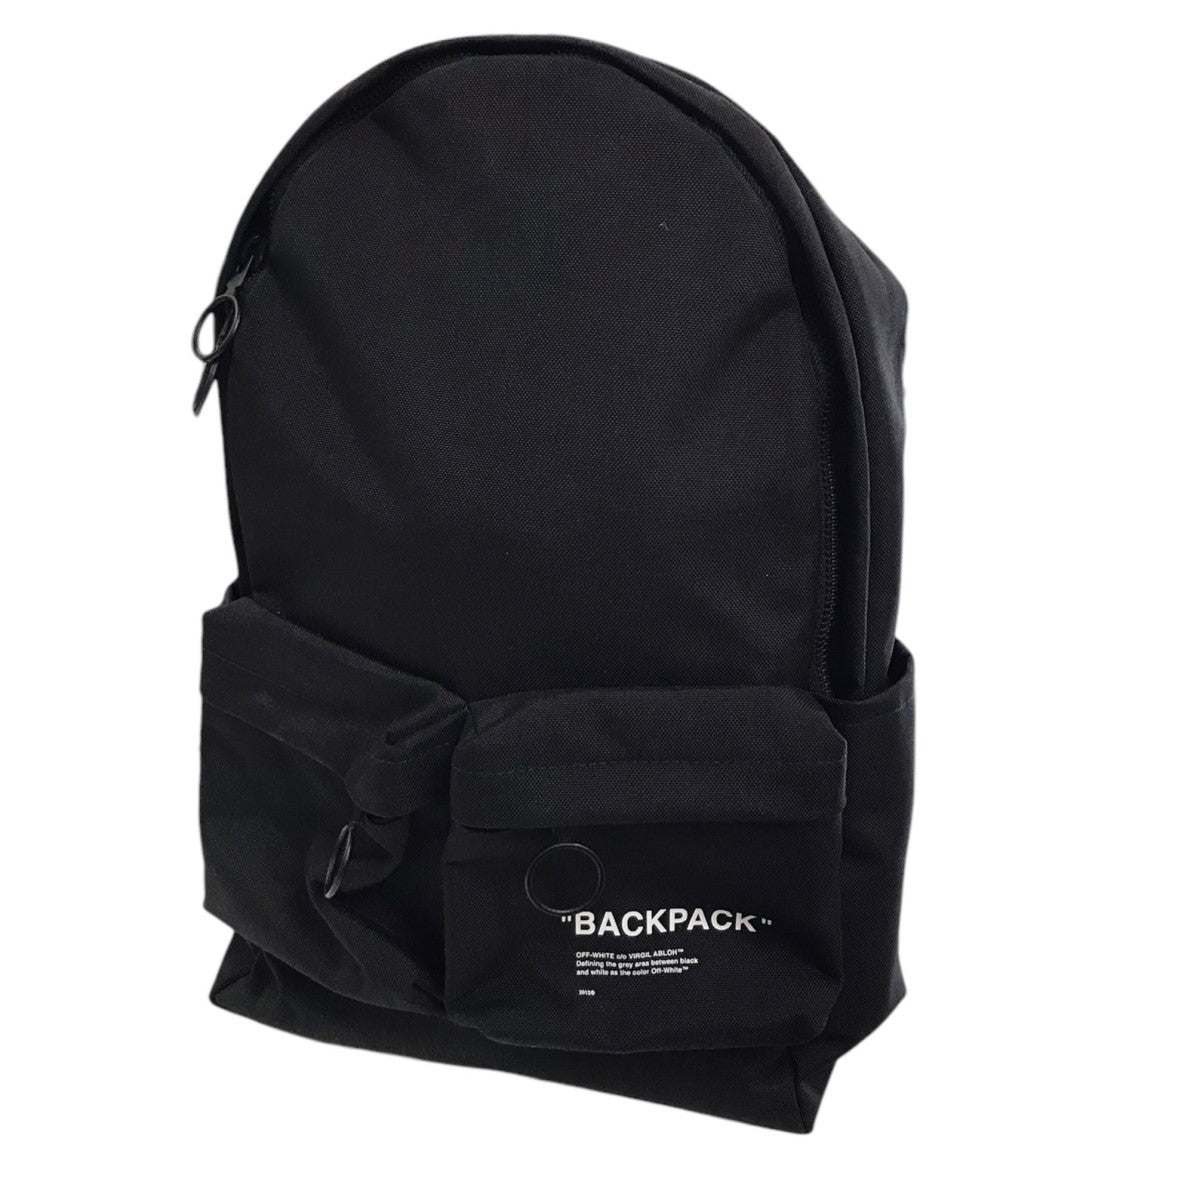 OFFWHITE(オフホワイト) 「QUOTE BACK PACK」 ロゴプリントバック ...